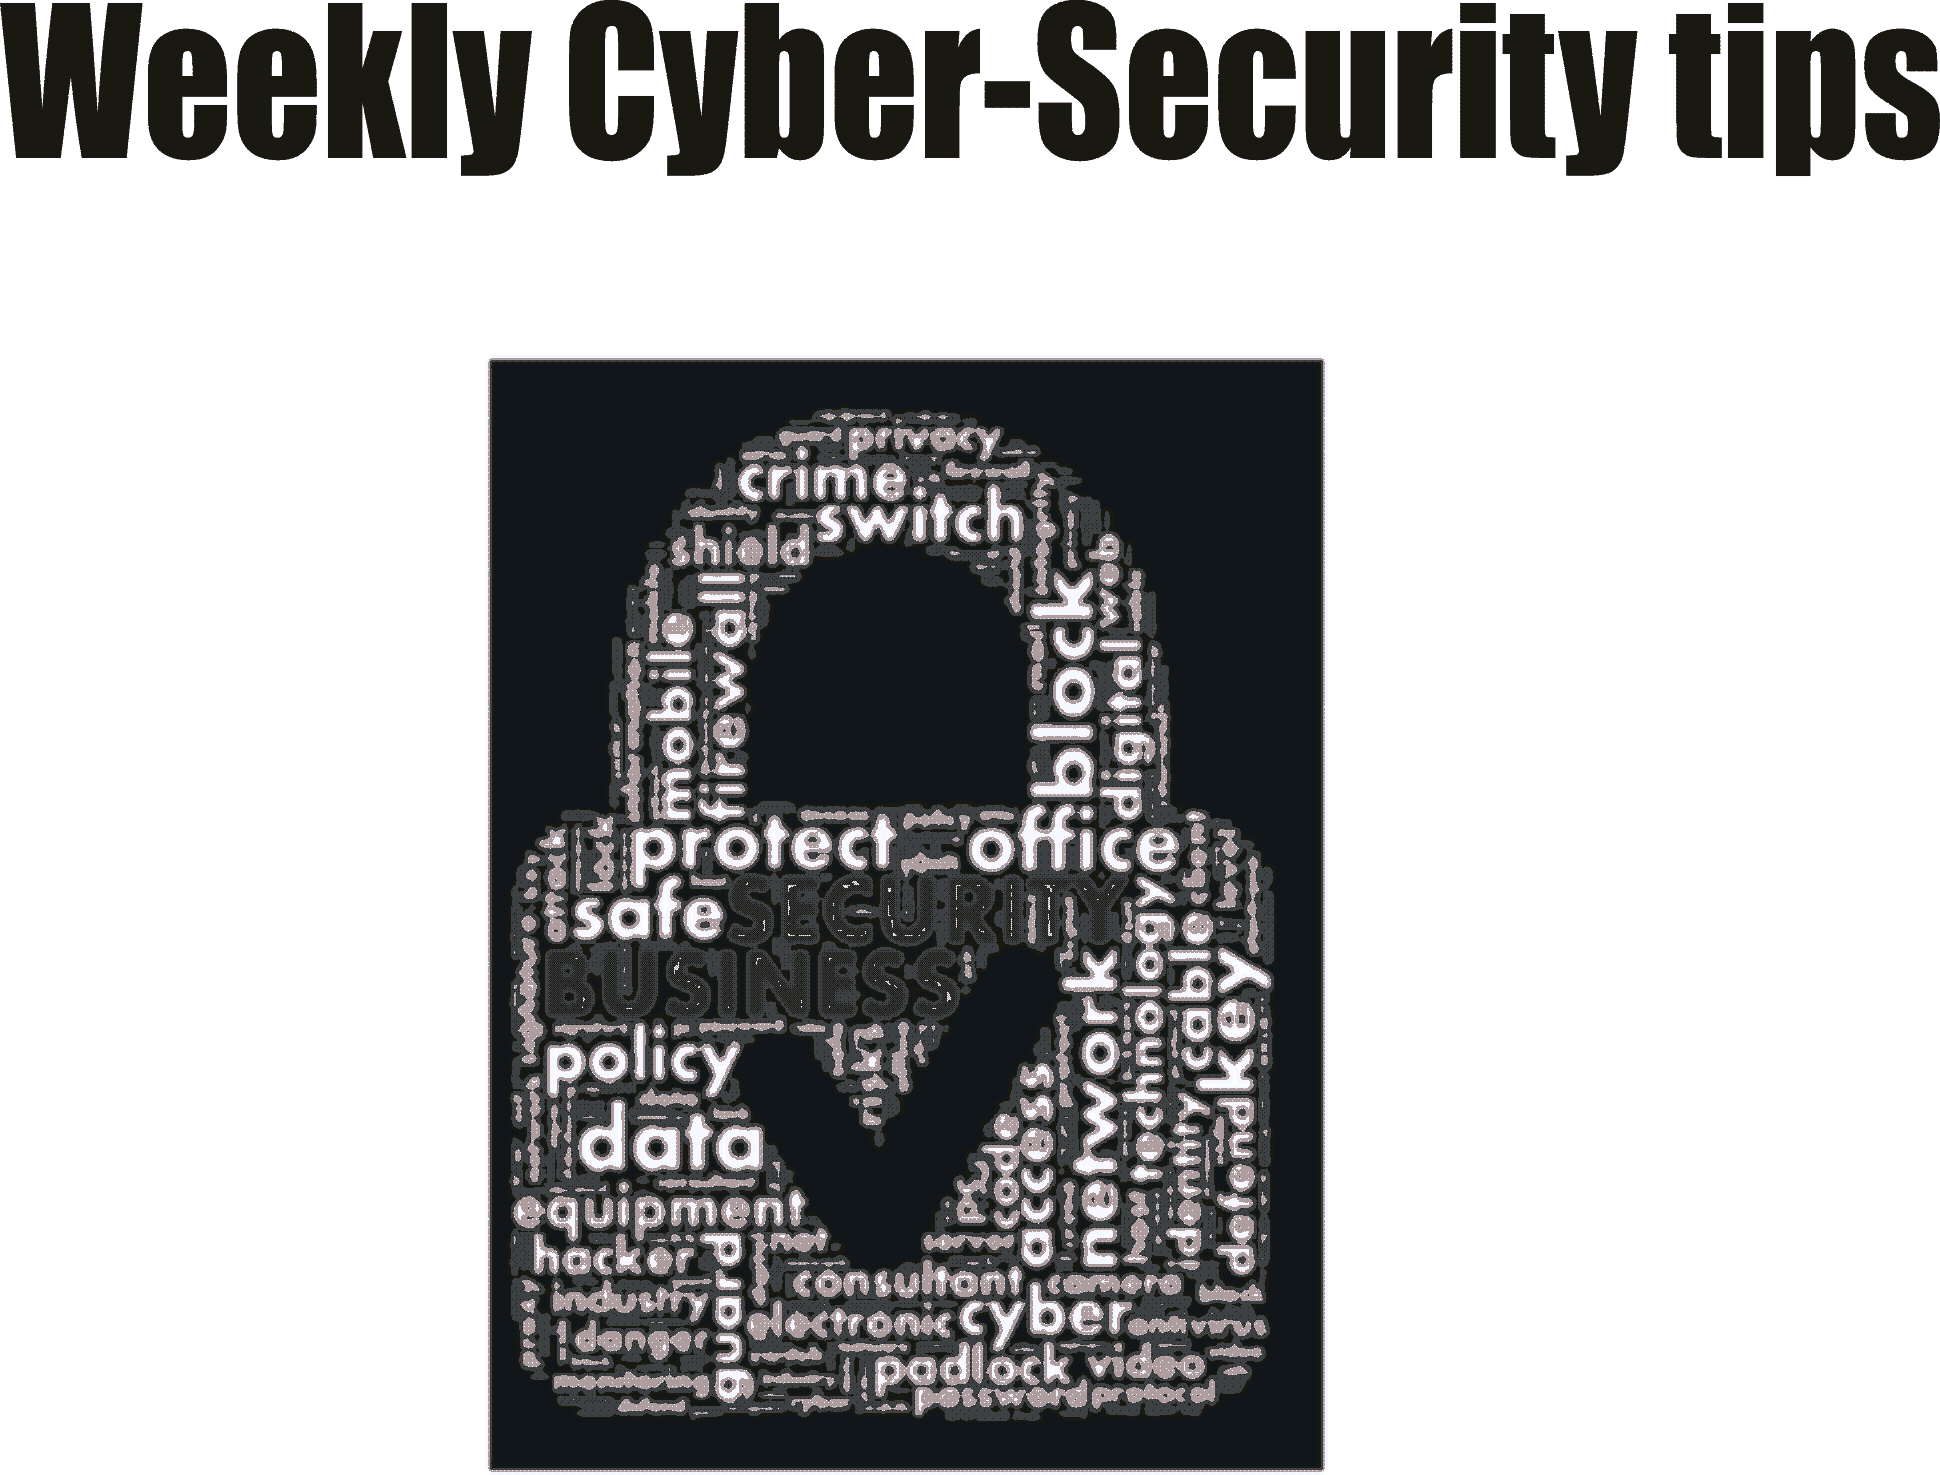 Weekly Cyber Security tips